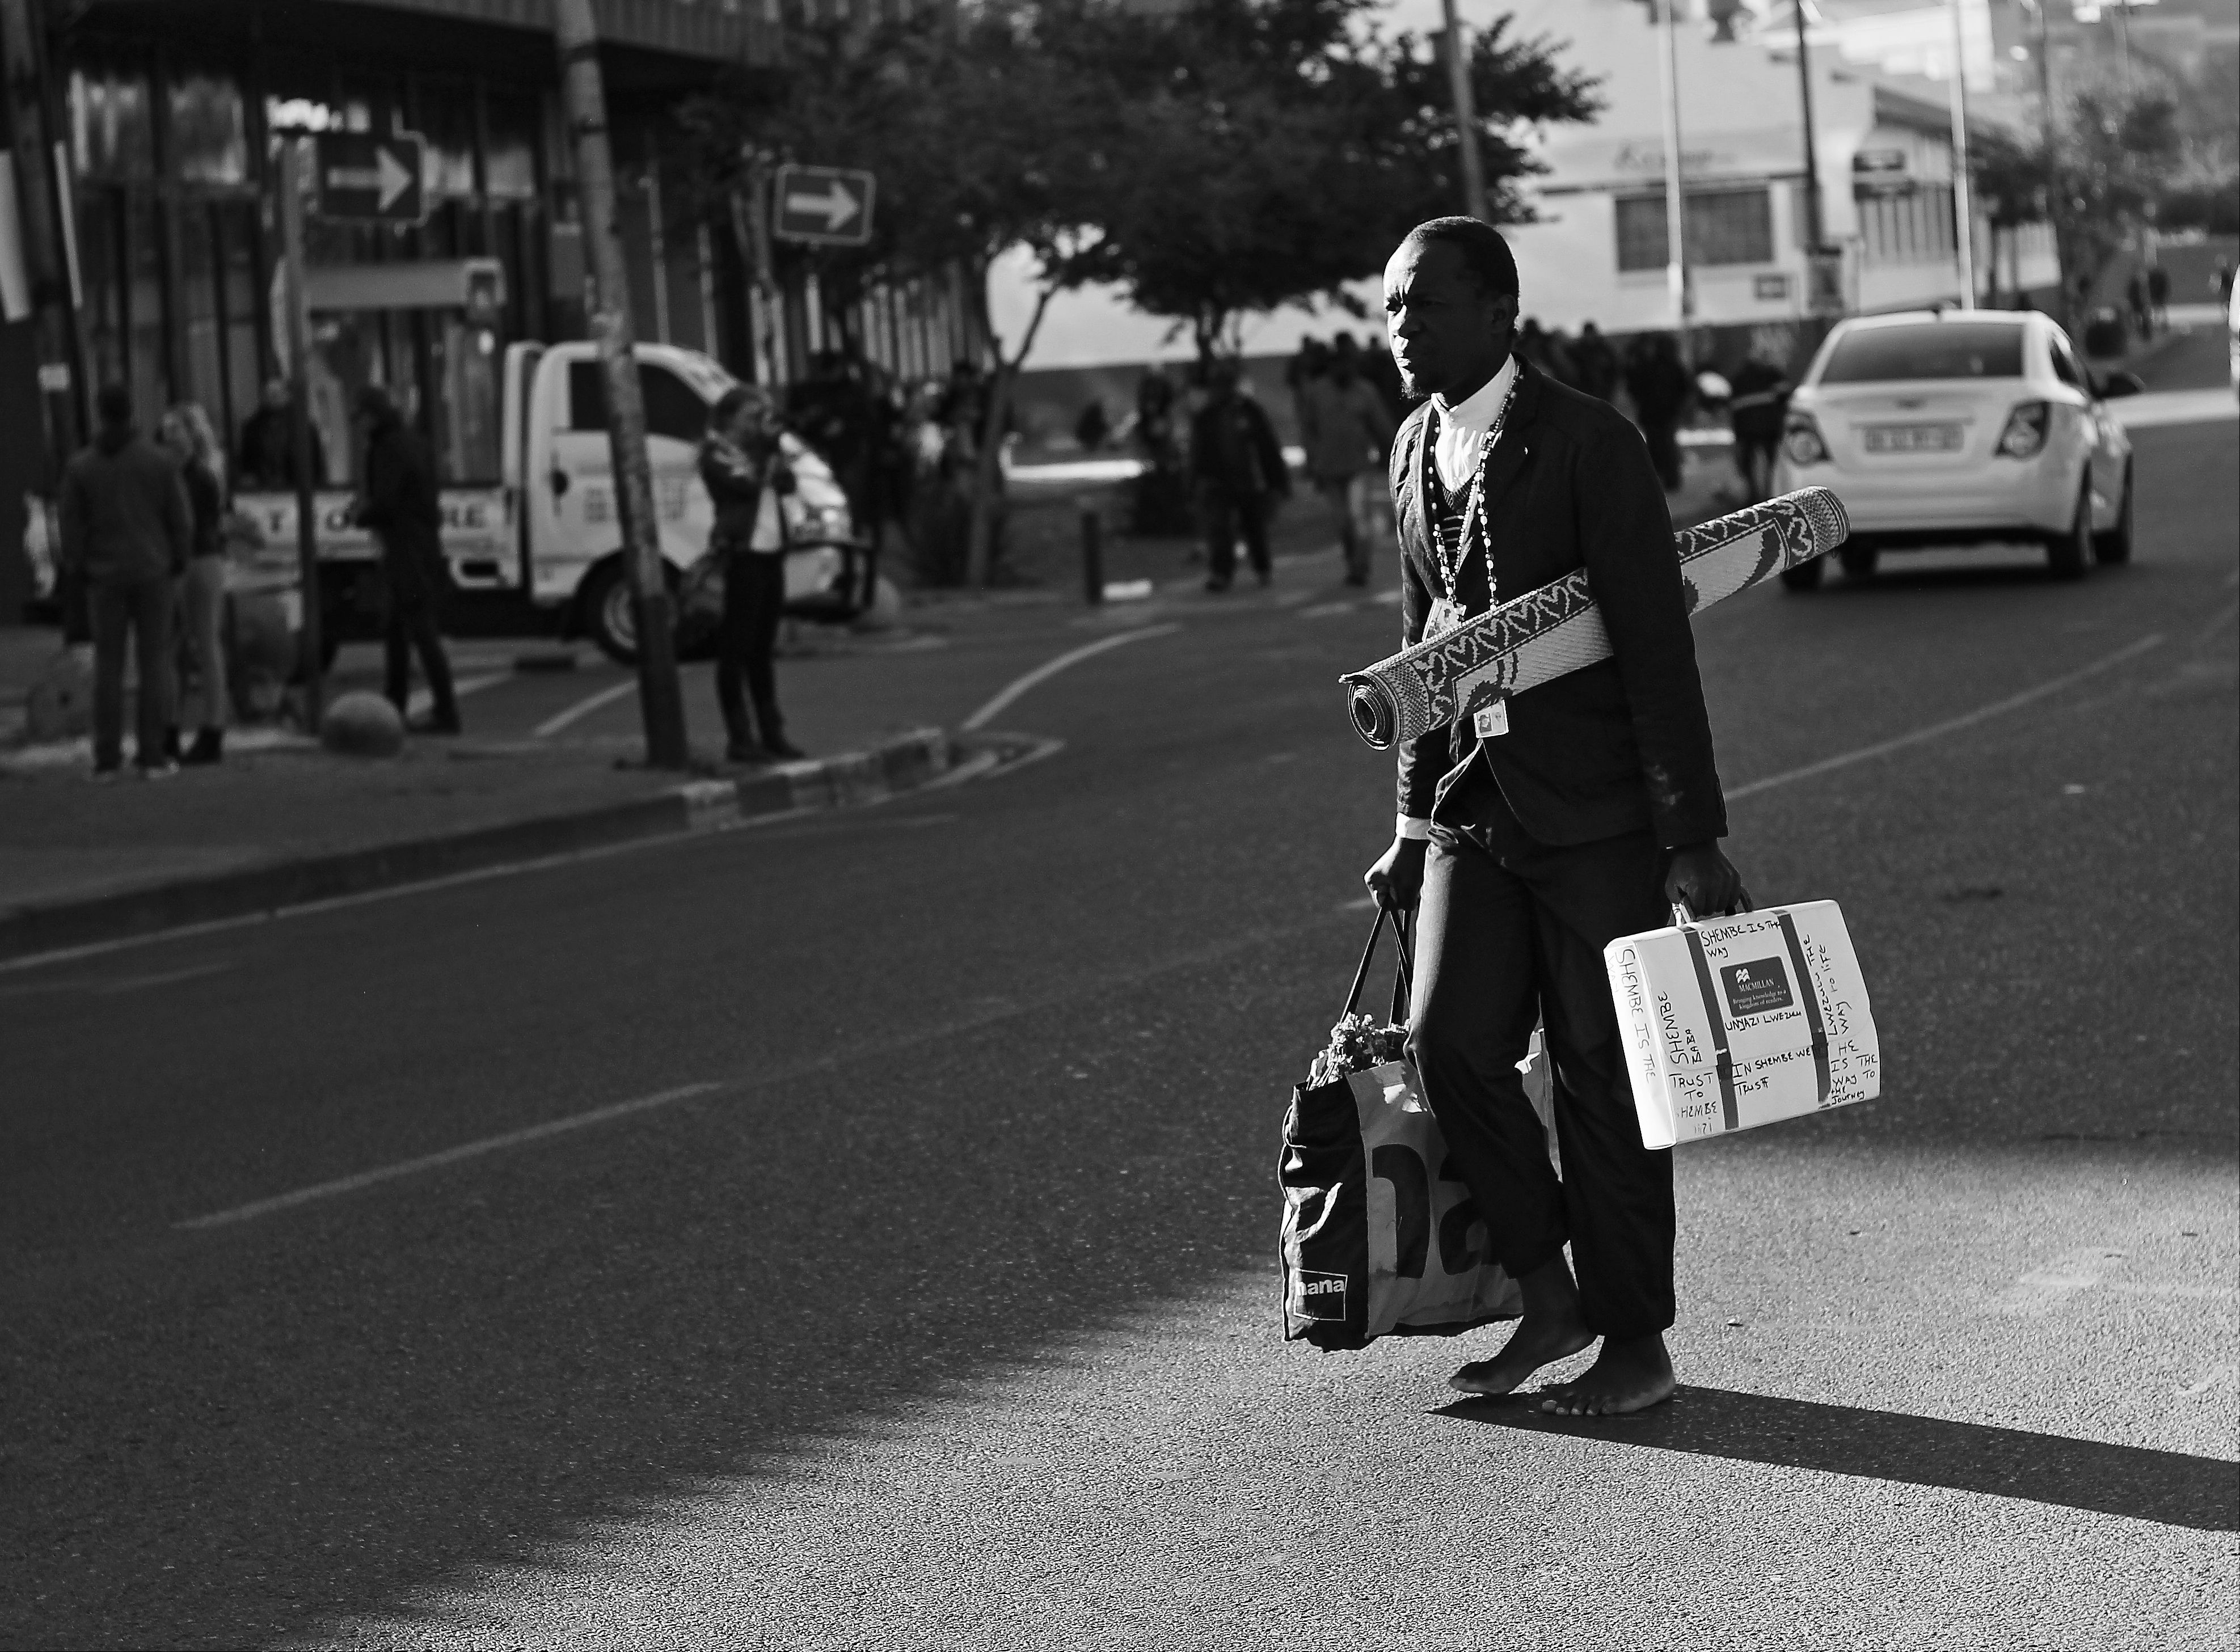 A traditional dance performer, barefooted and on his way to work (Doornfontein, 2015)